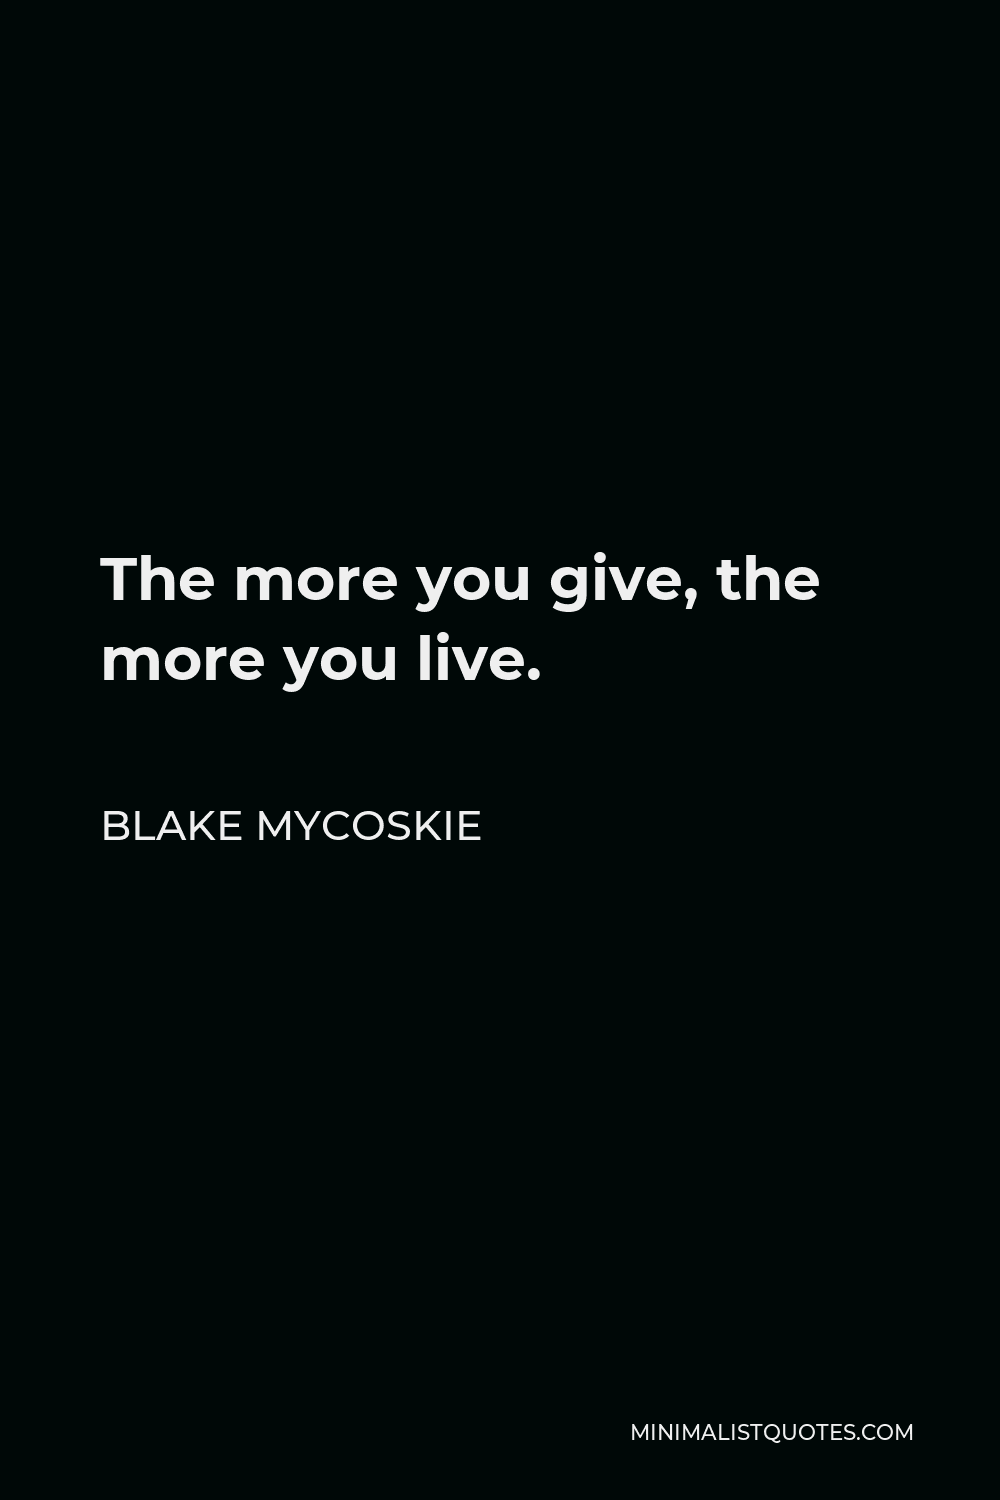 Blake Mycoskie Quote - The more you give, the more you live.